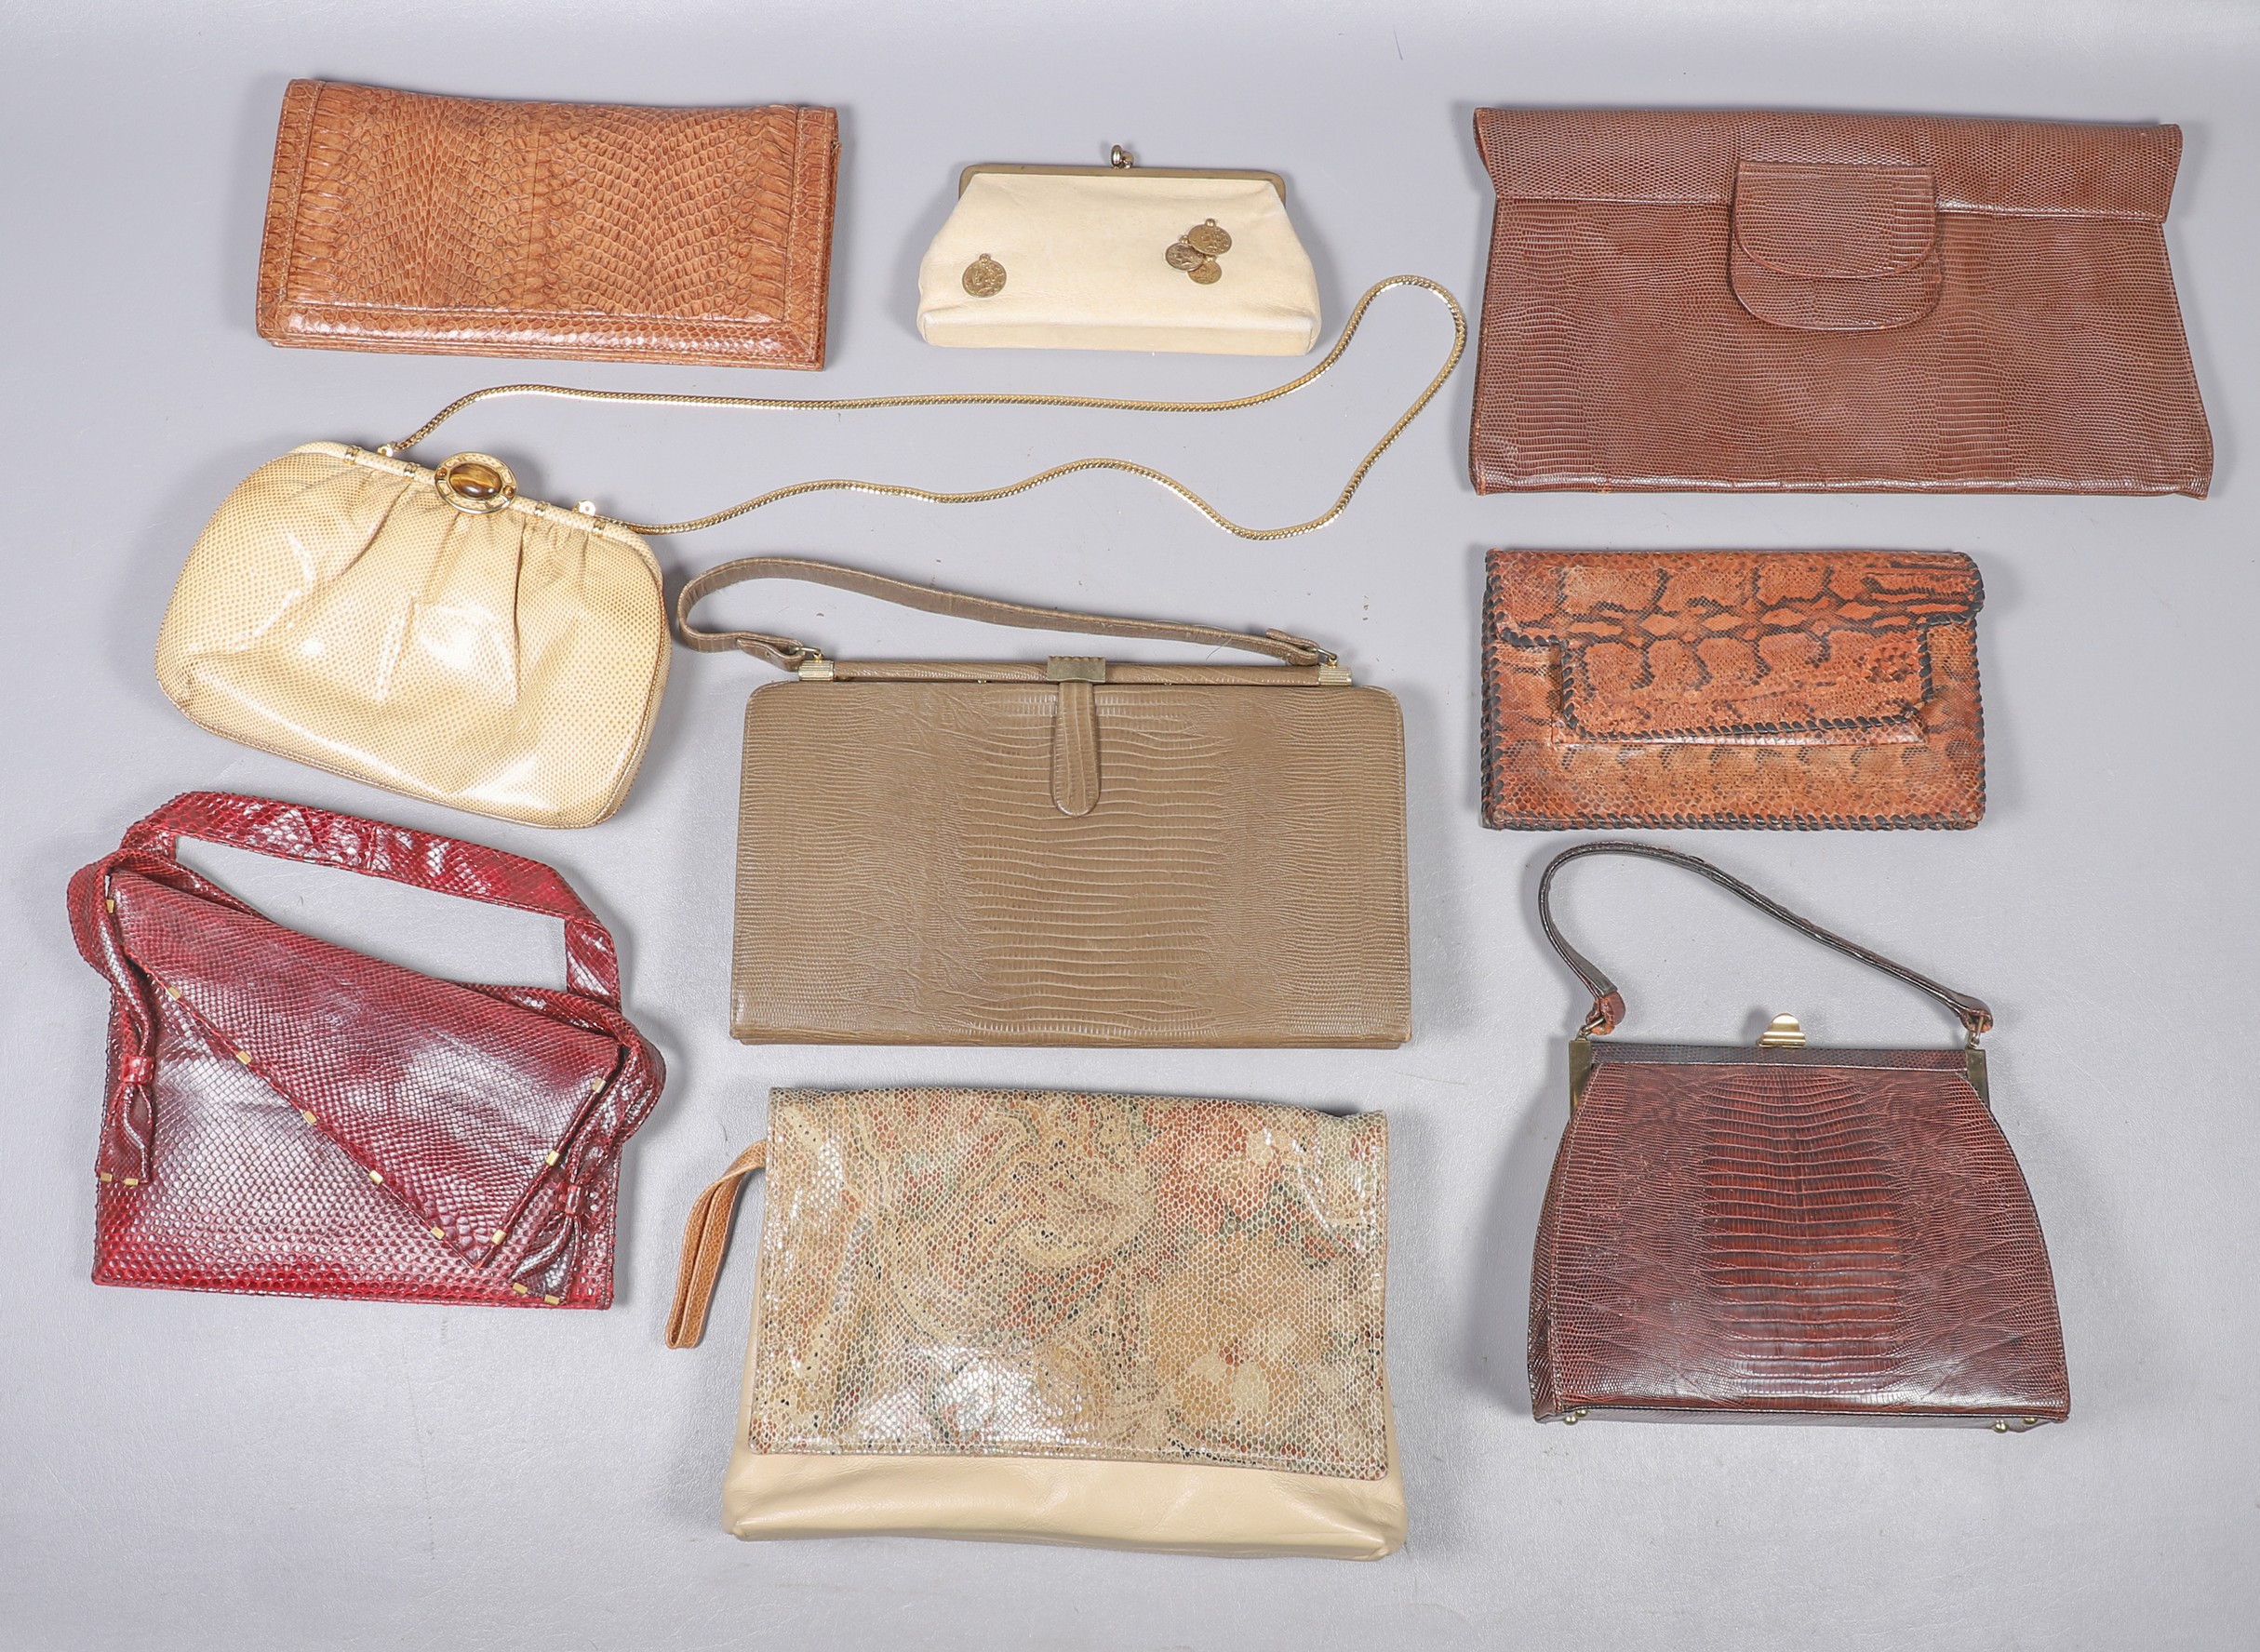 60 s 70 s reptile skin purses to 27a687